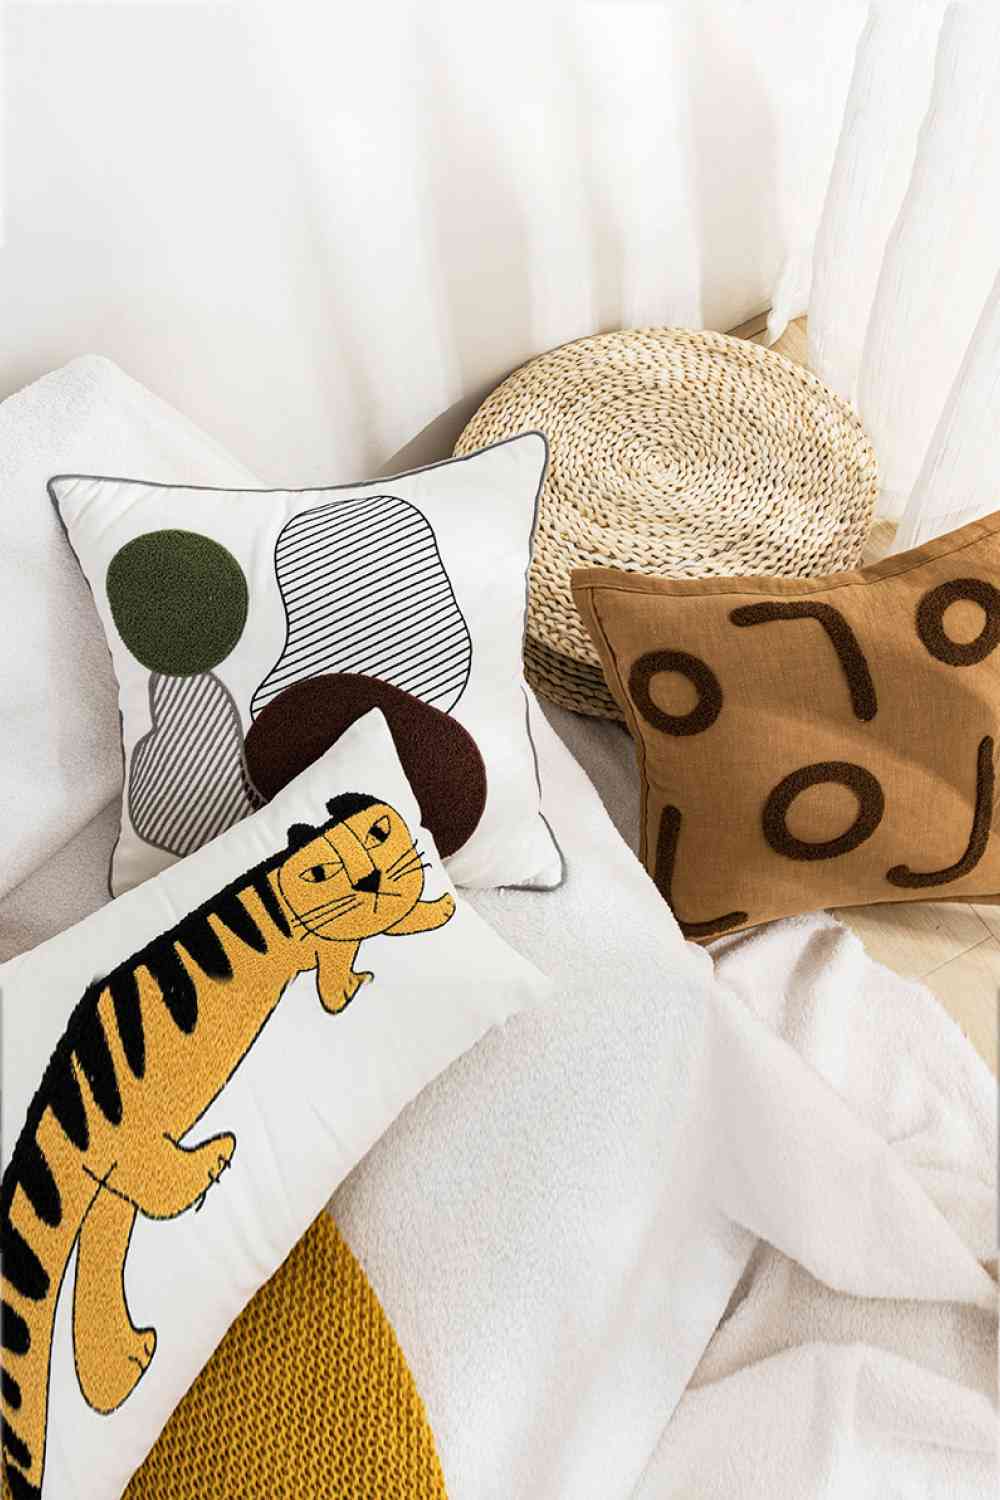 3-Pack Punch-Needle Embroidery Decorative Throw Pillow Cases - Tophatter Deals